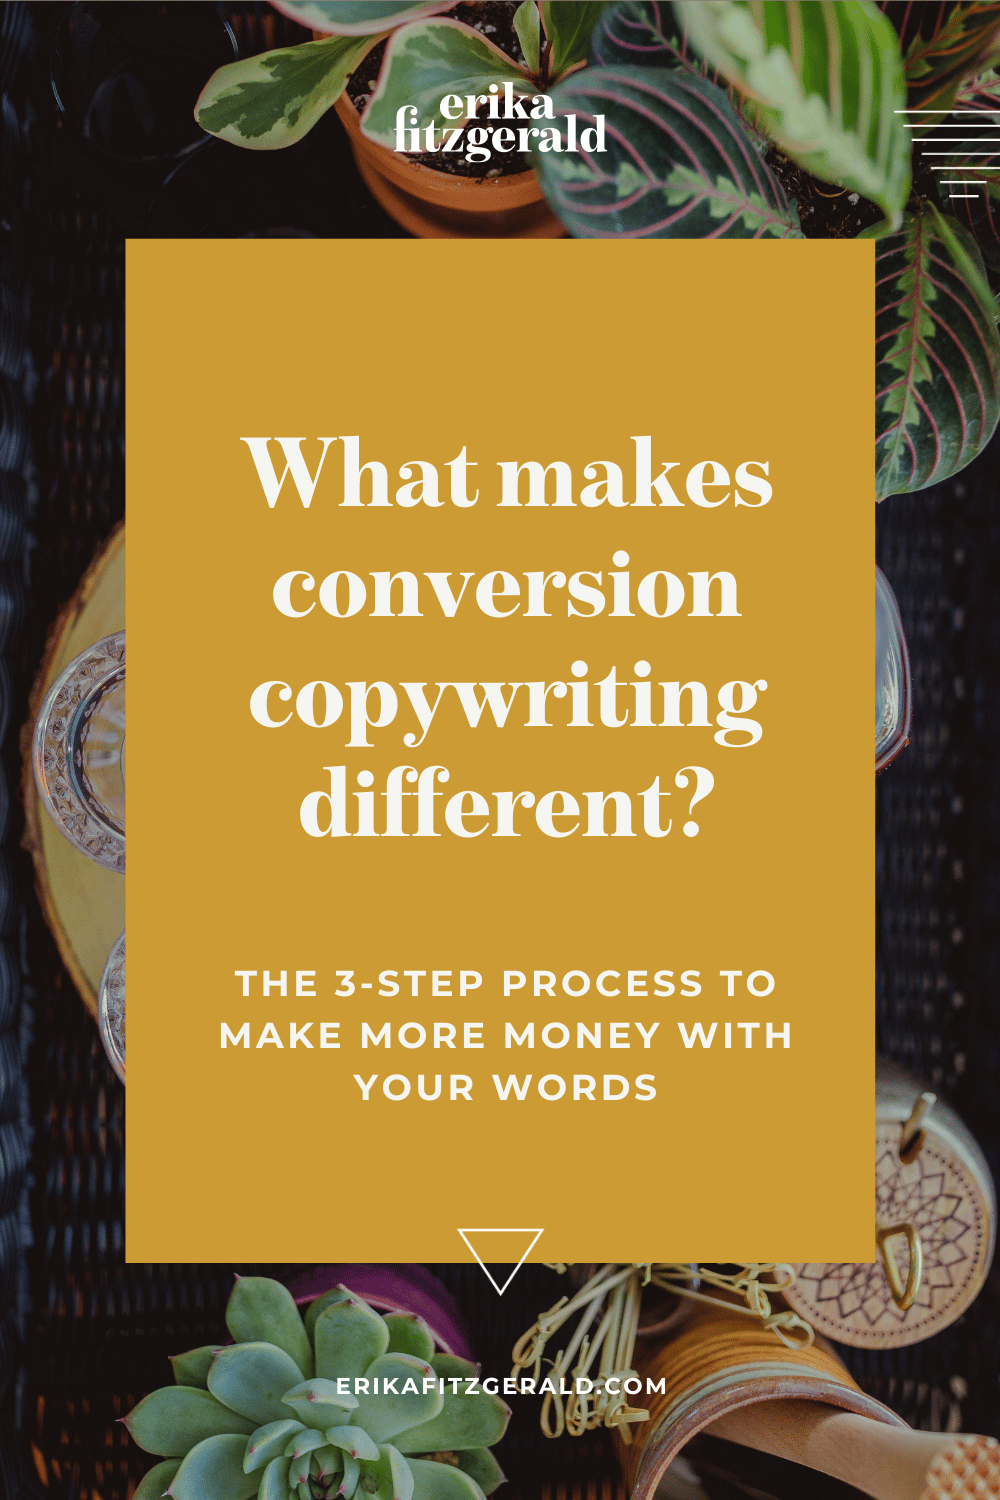 What makes conversion copywriting different